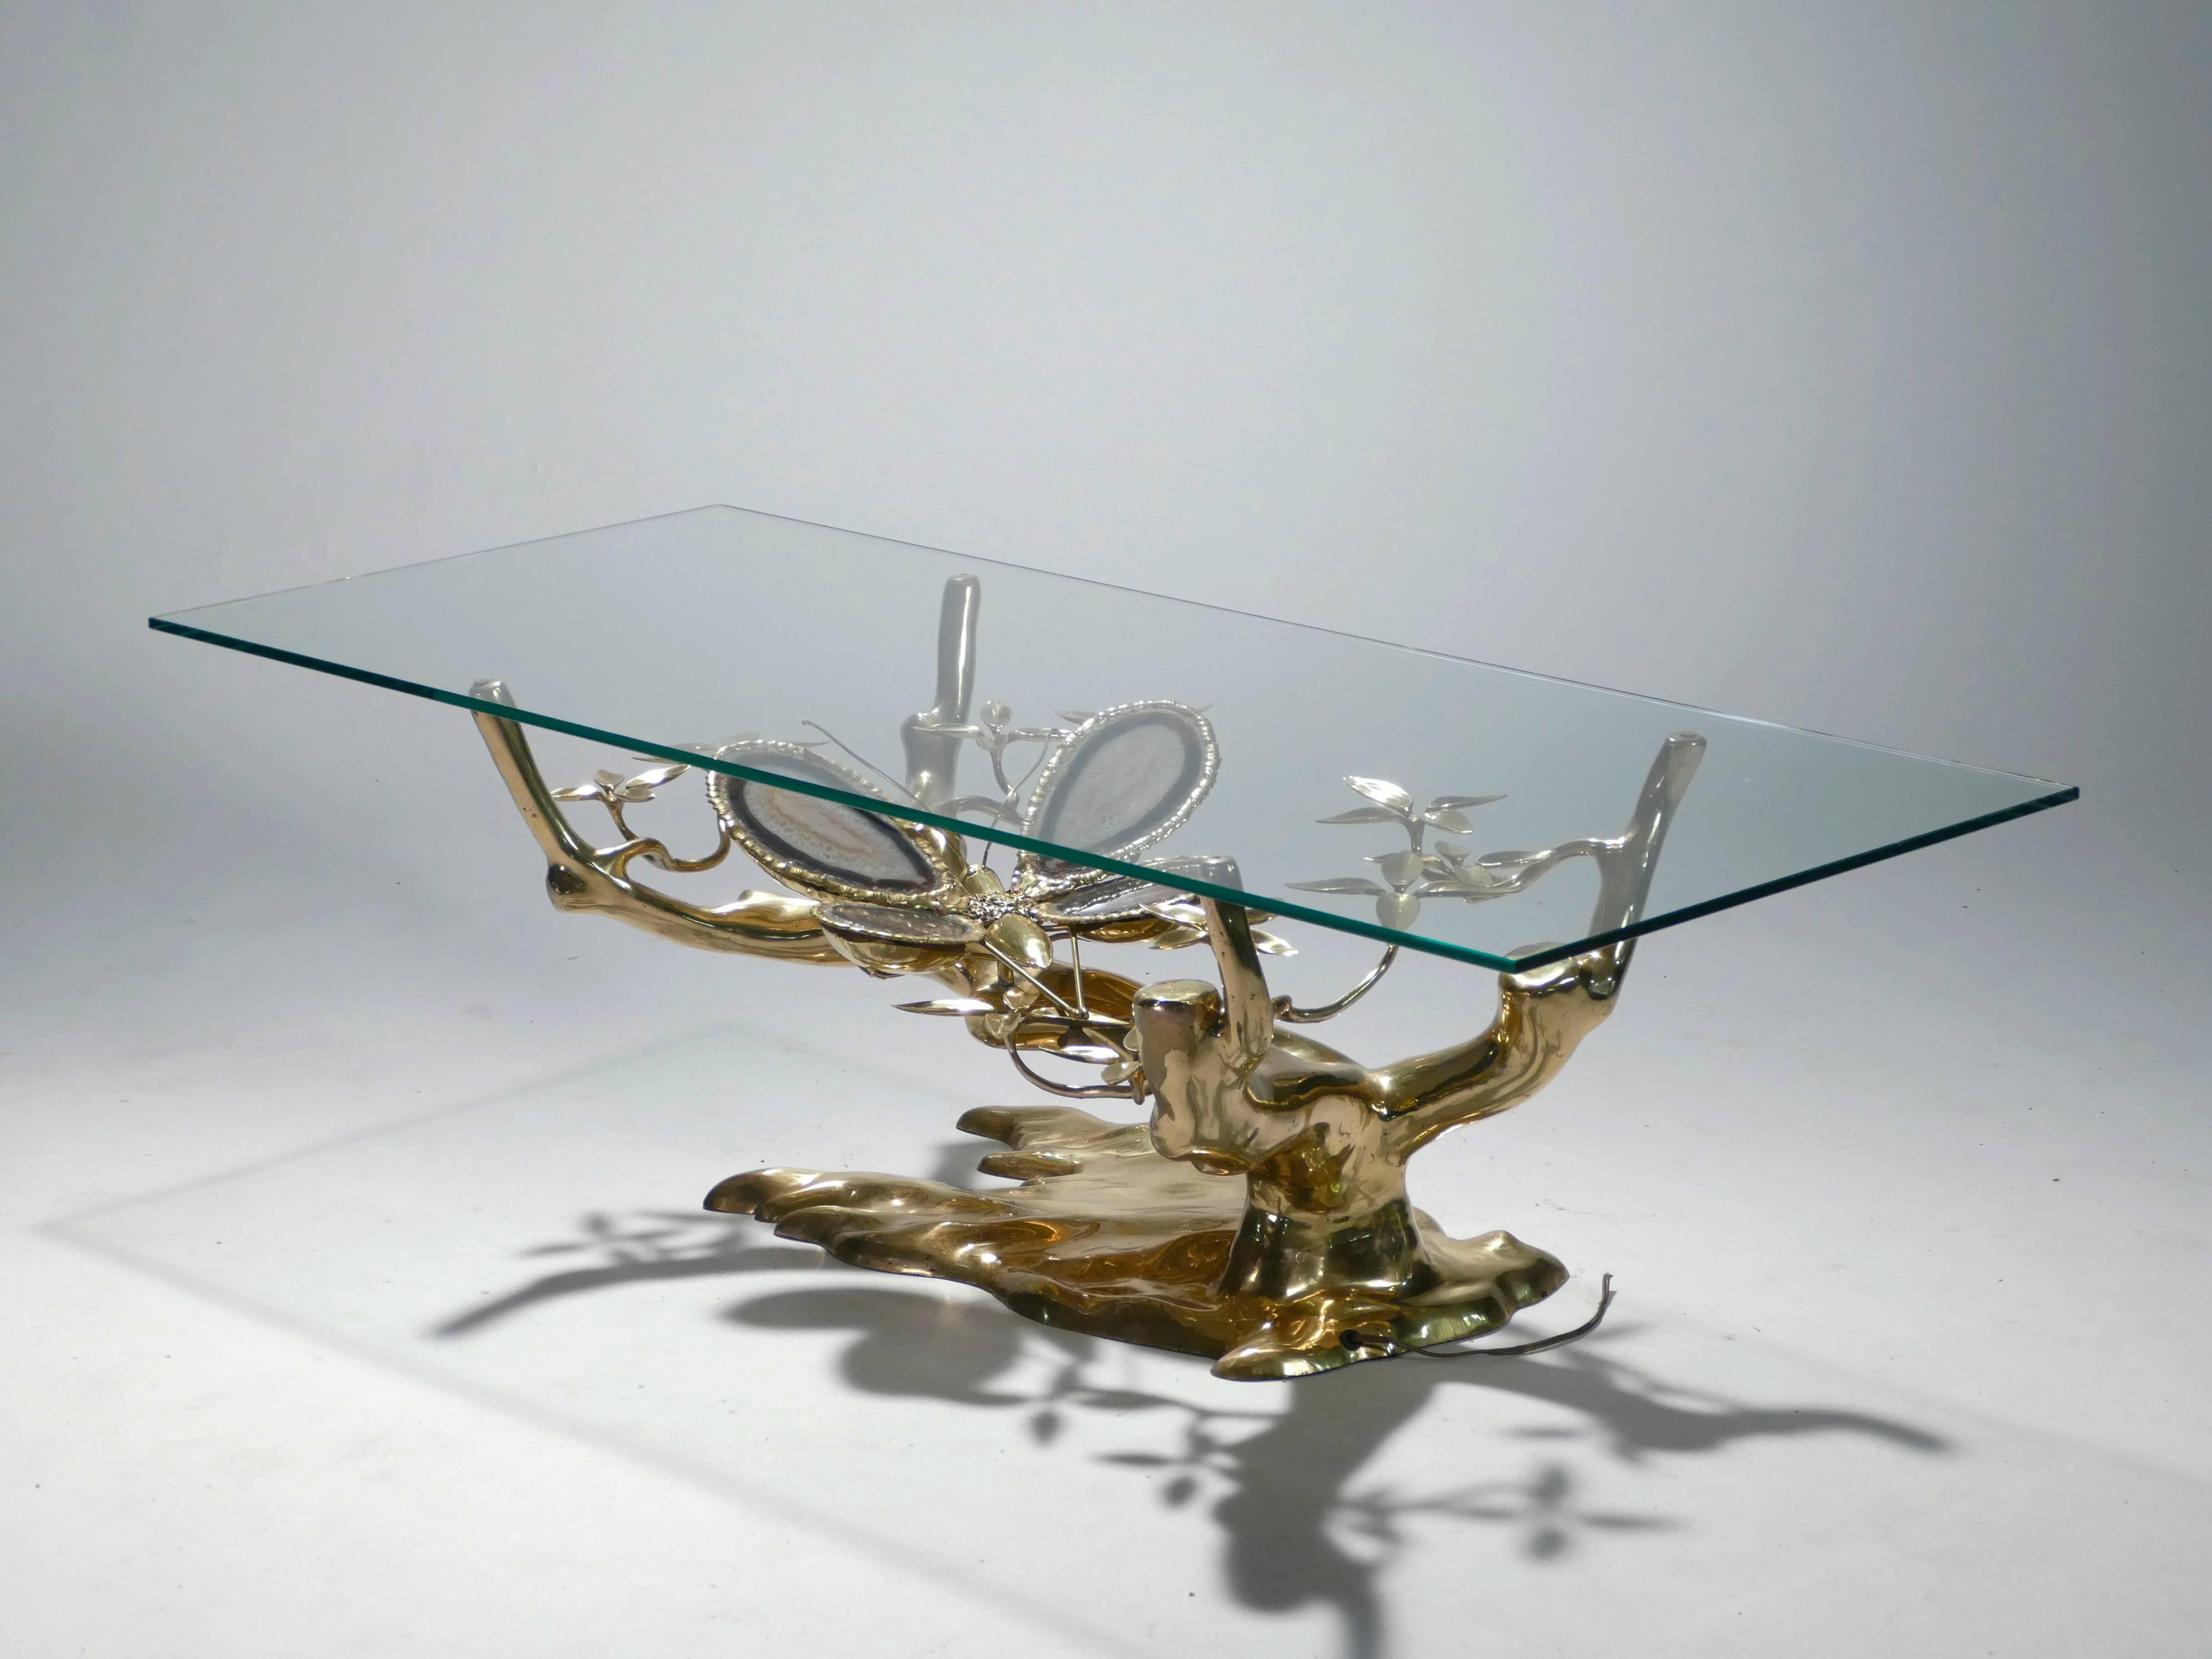 Looking directly down at this coffee table, you peer through the sharp, transparent glass to a butterfly brandishing its fascinating, agate stone wings among leaves and branches made of molten brass. This rare, extraordinary piece was designed by